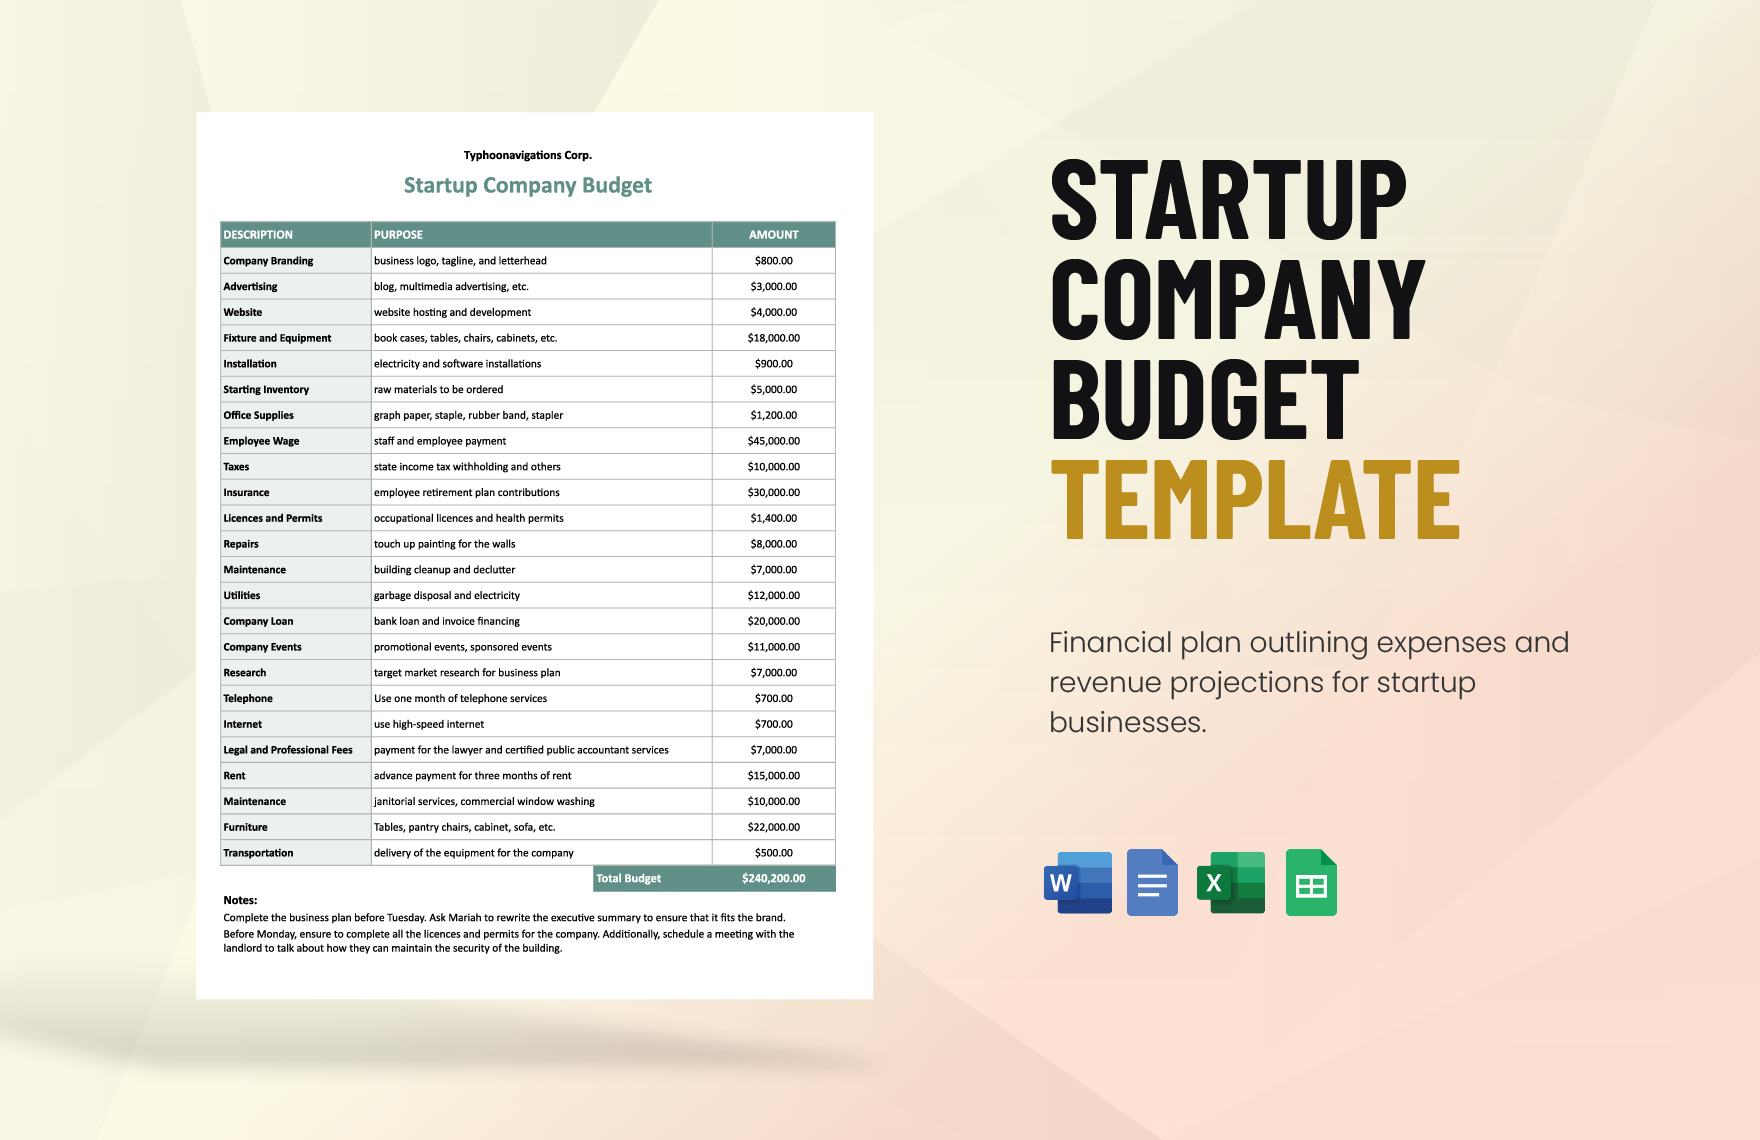 Startup Company Budget Template in Word, Google Docs, Excel, Google Sheets